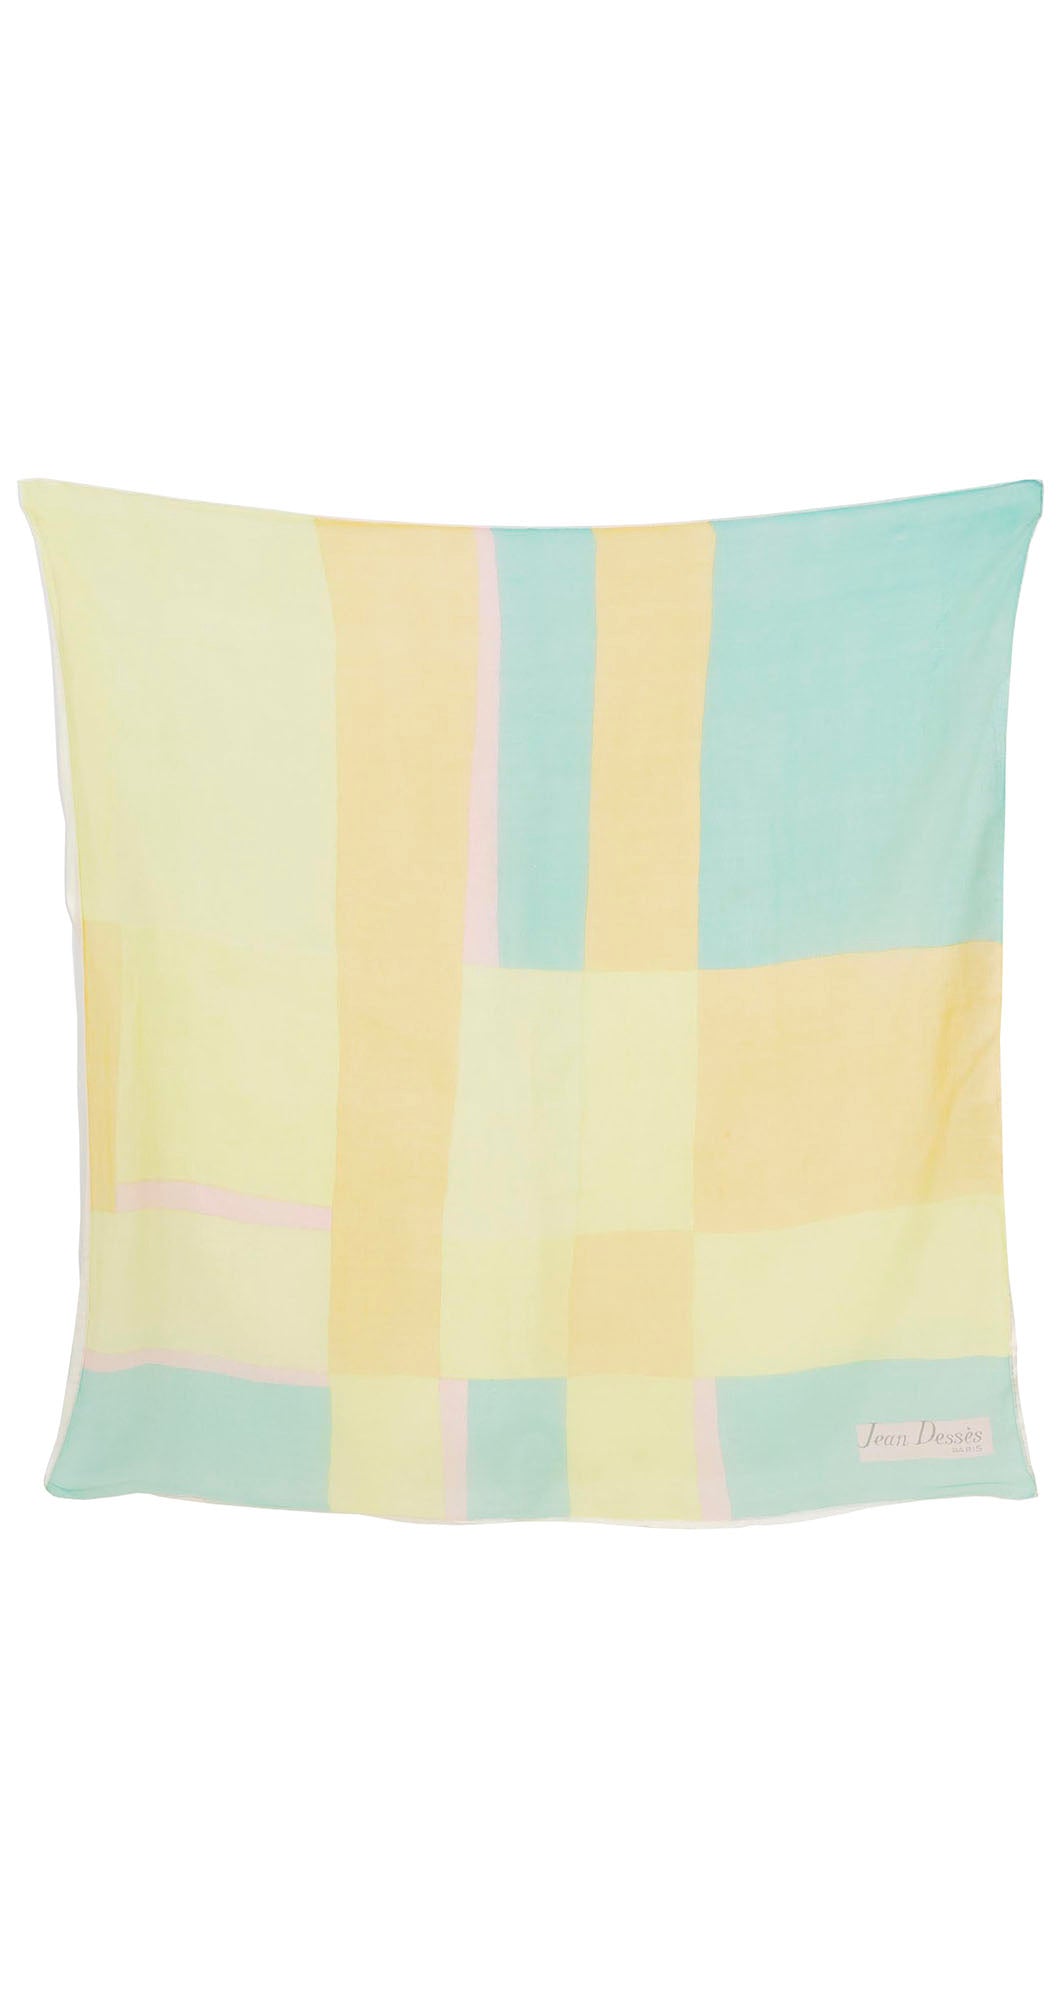 1960s Mod Pastel Silk Double Layer Scarf